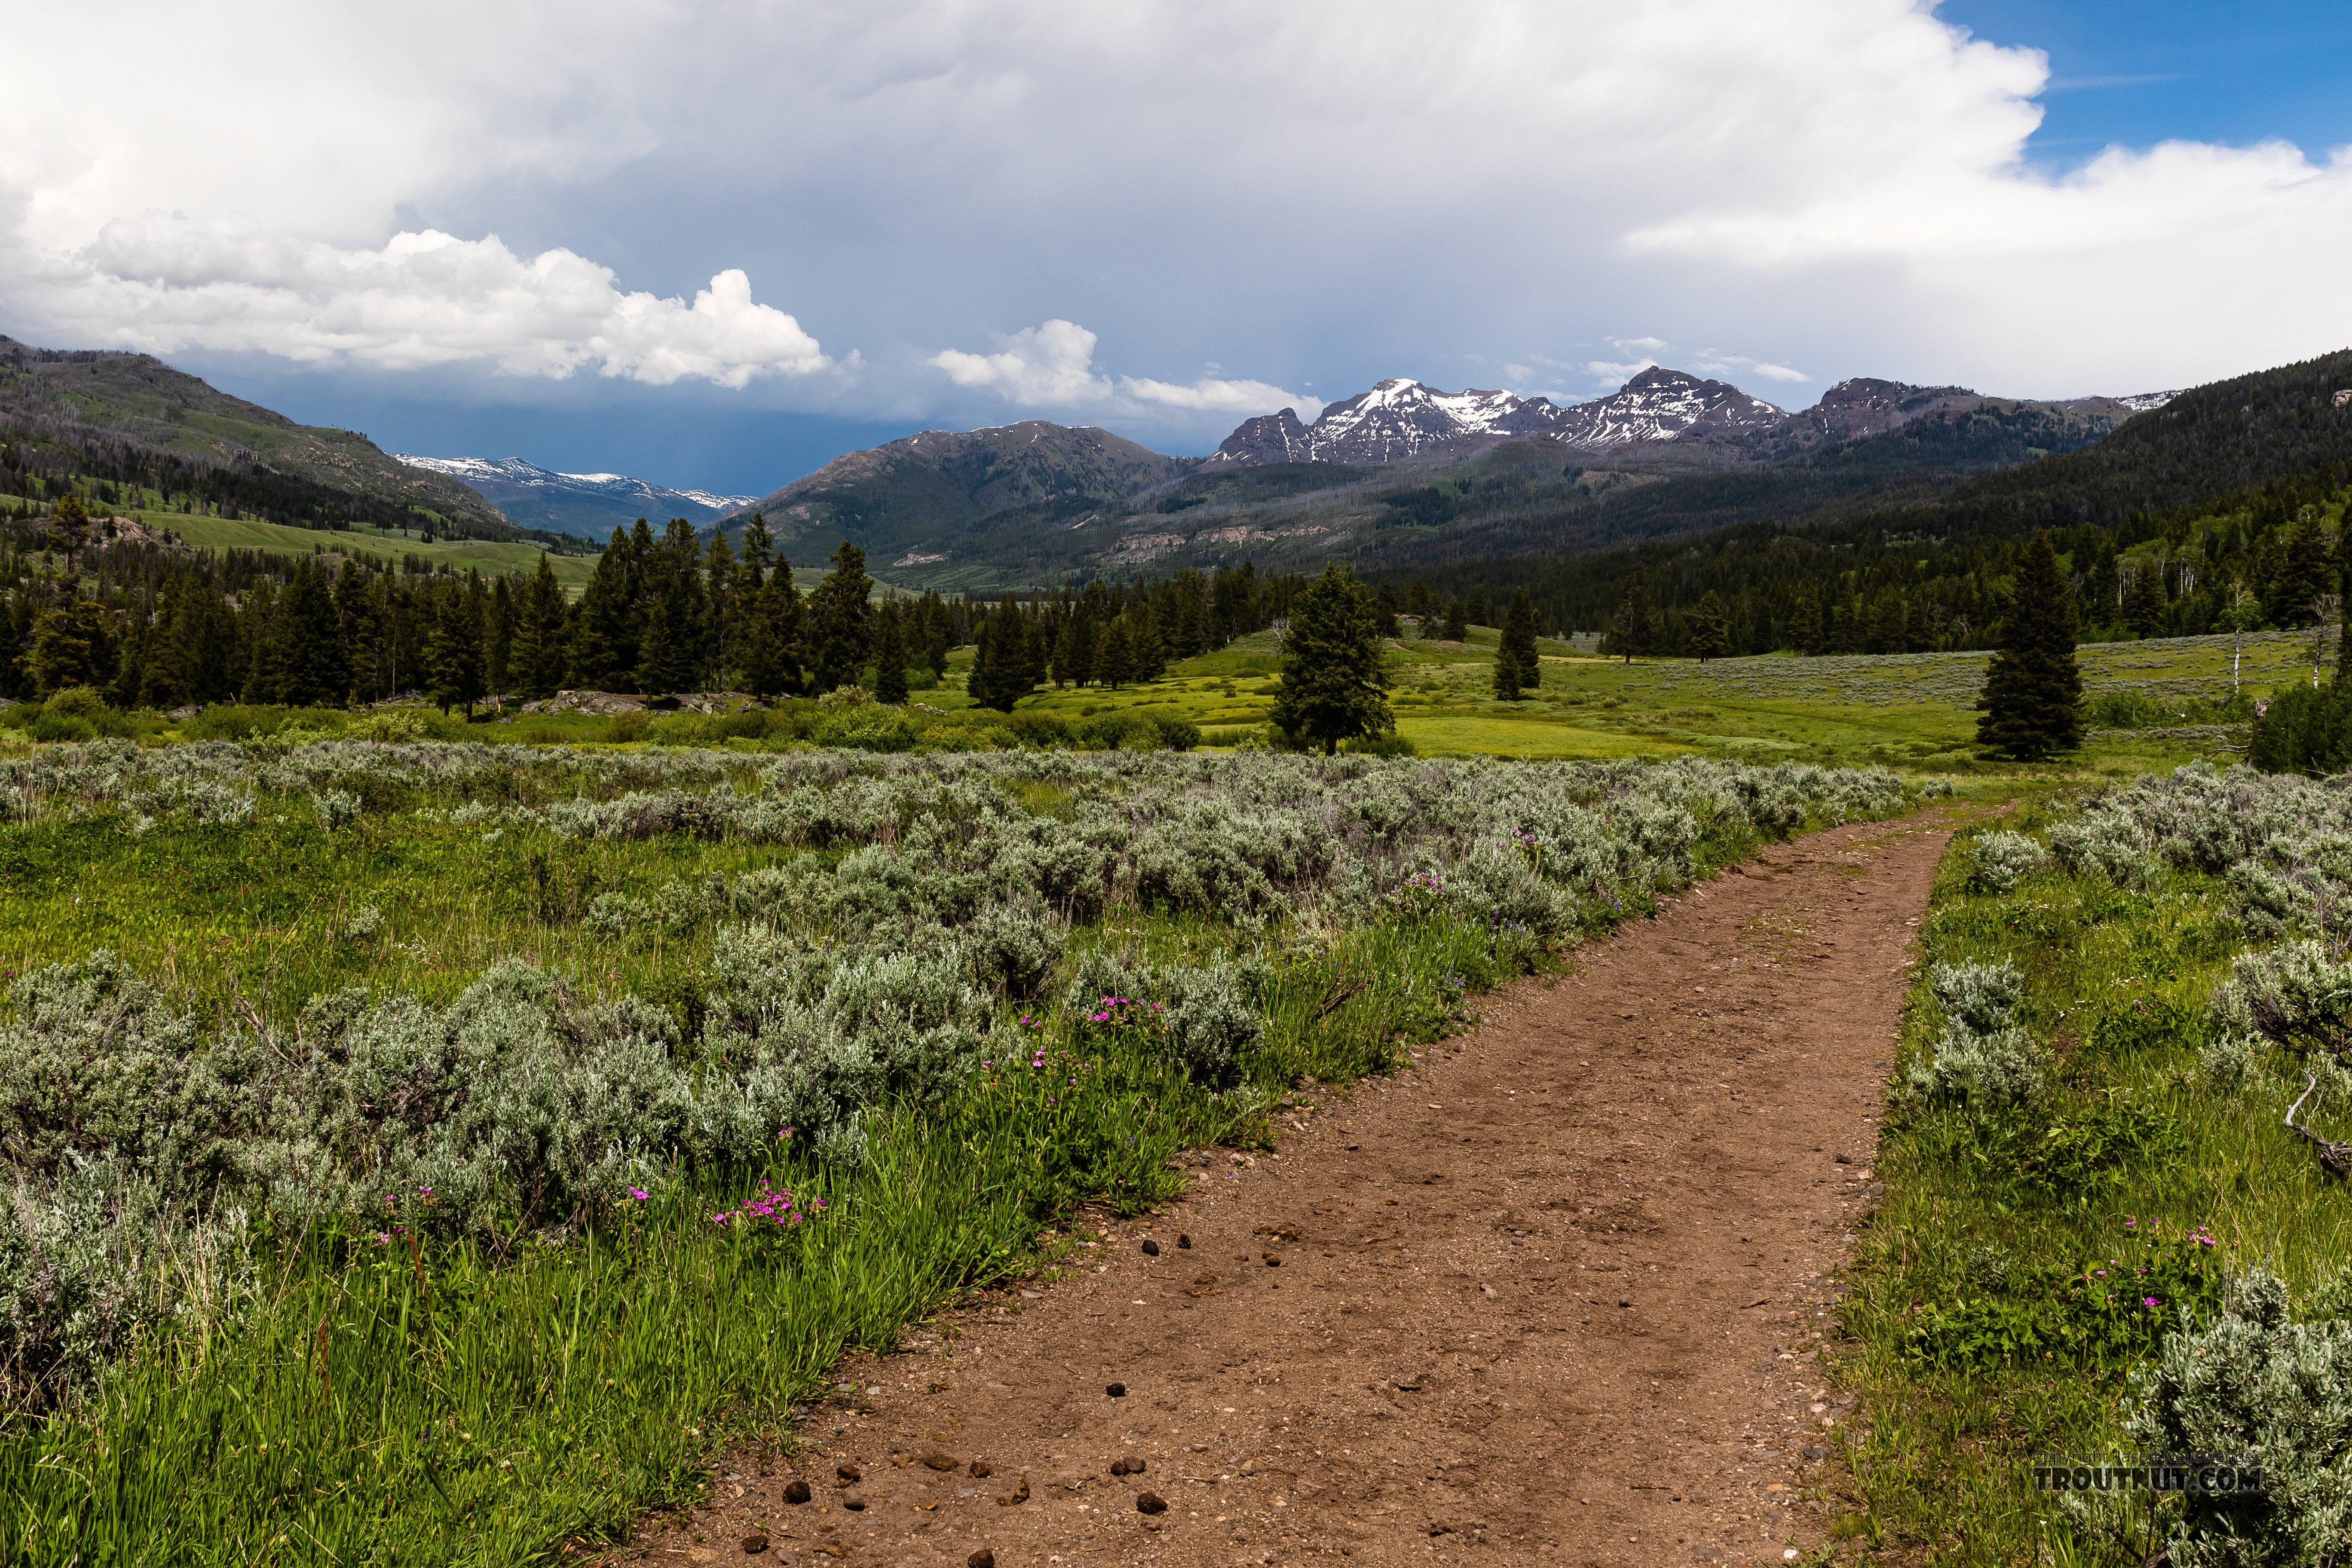 The trail up Slough Creek is one of the most well-trodden in the Yellowstone backcountry, but it still didn't feel crowded at all once we got beyond the first meadow. From Slough Creek in Wyoming.